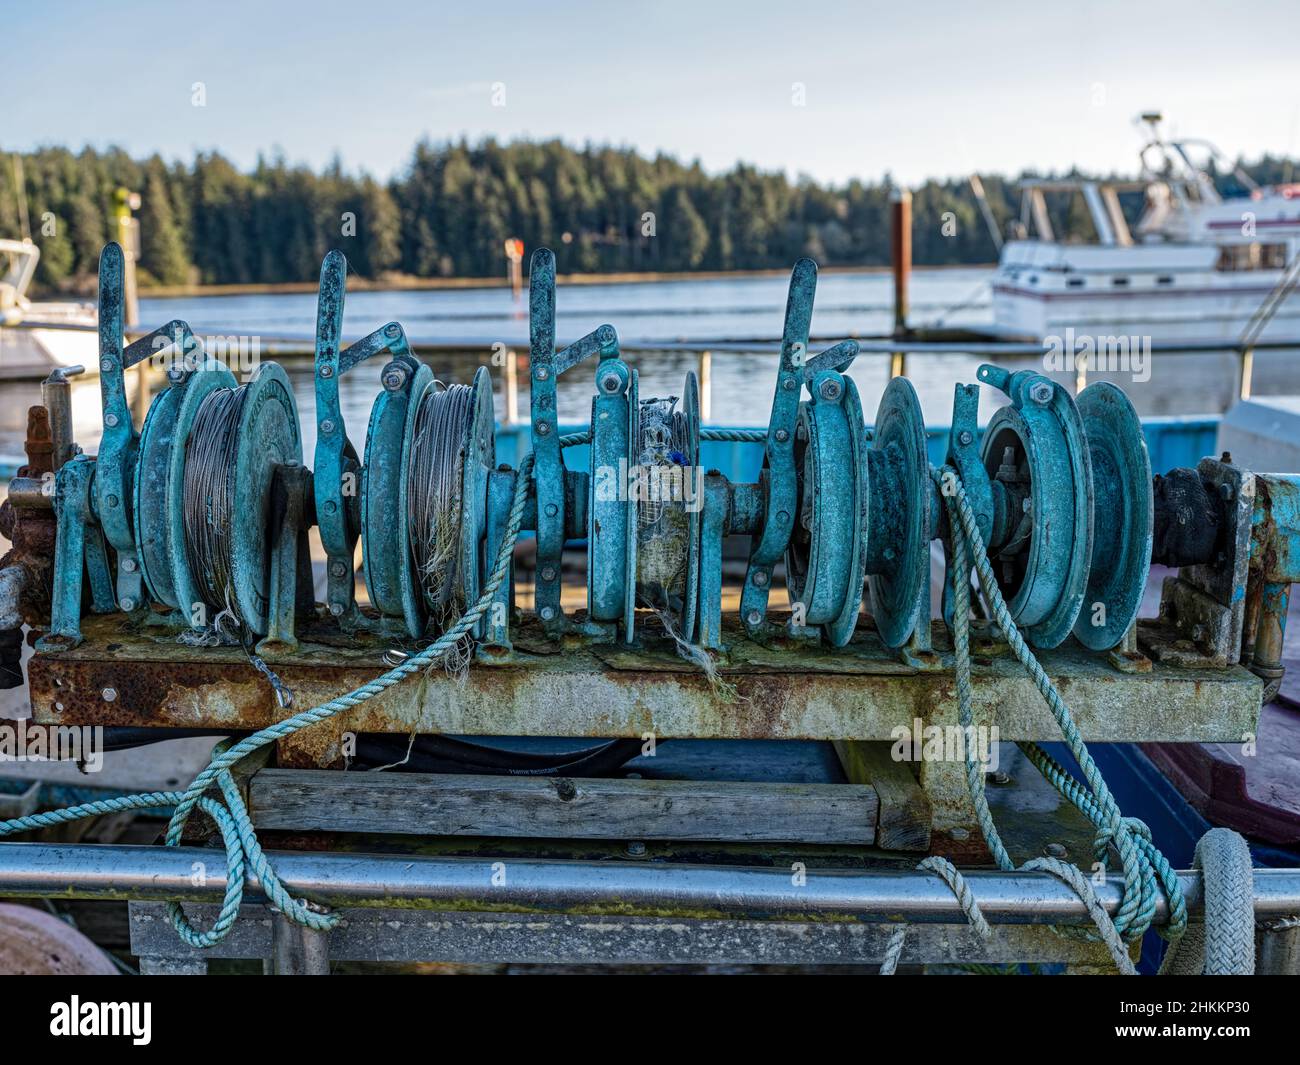 Detail of Winch on Fishing Boat Stock Image - Image of poop, cord: 83427585